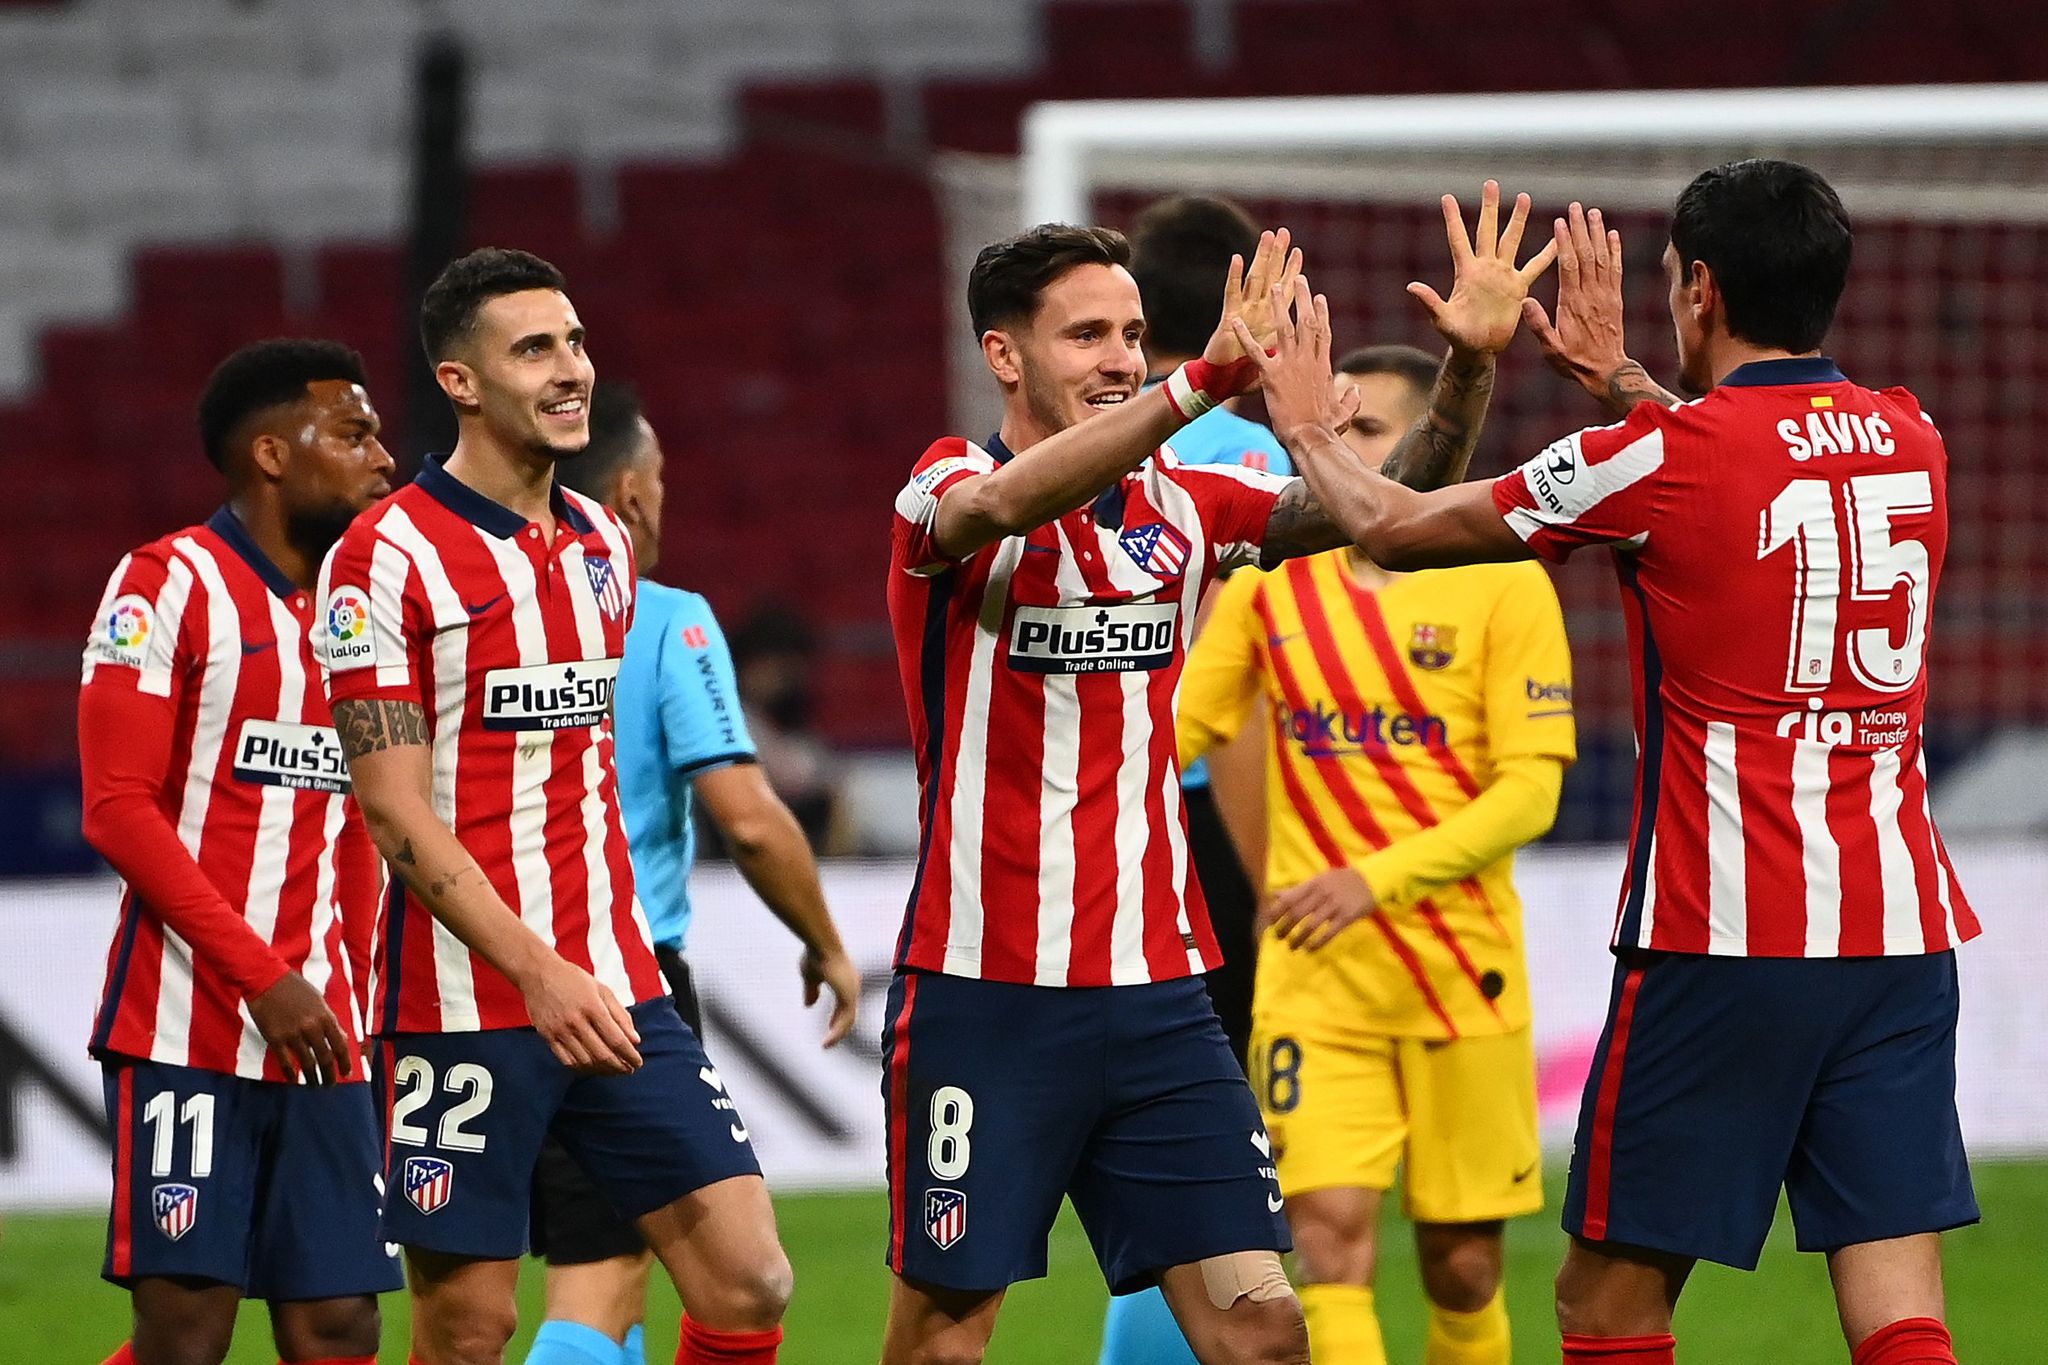 lt;HIT gt;Atletico lt;/HIT gt; lt;HIT gt;Madrid lt;/HIT gt;'s players celebrate at the end of the Spanish League football match between Club lt;HIT gt;Atletico lt;/HIT gt; de lt;HIT gt;Madrid lt;/HIT gt; and FC Barcelona at the Wanda Metropolitano stadium in lt;HIT gt;Madrid lt;/HIT gt; on November 21, 2020. (Photo by GABRIEL BOUYS / AFP)